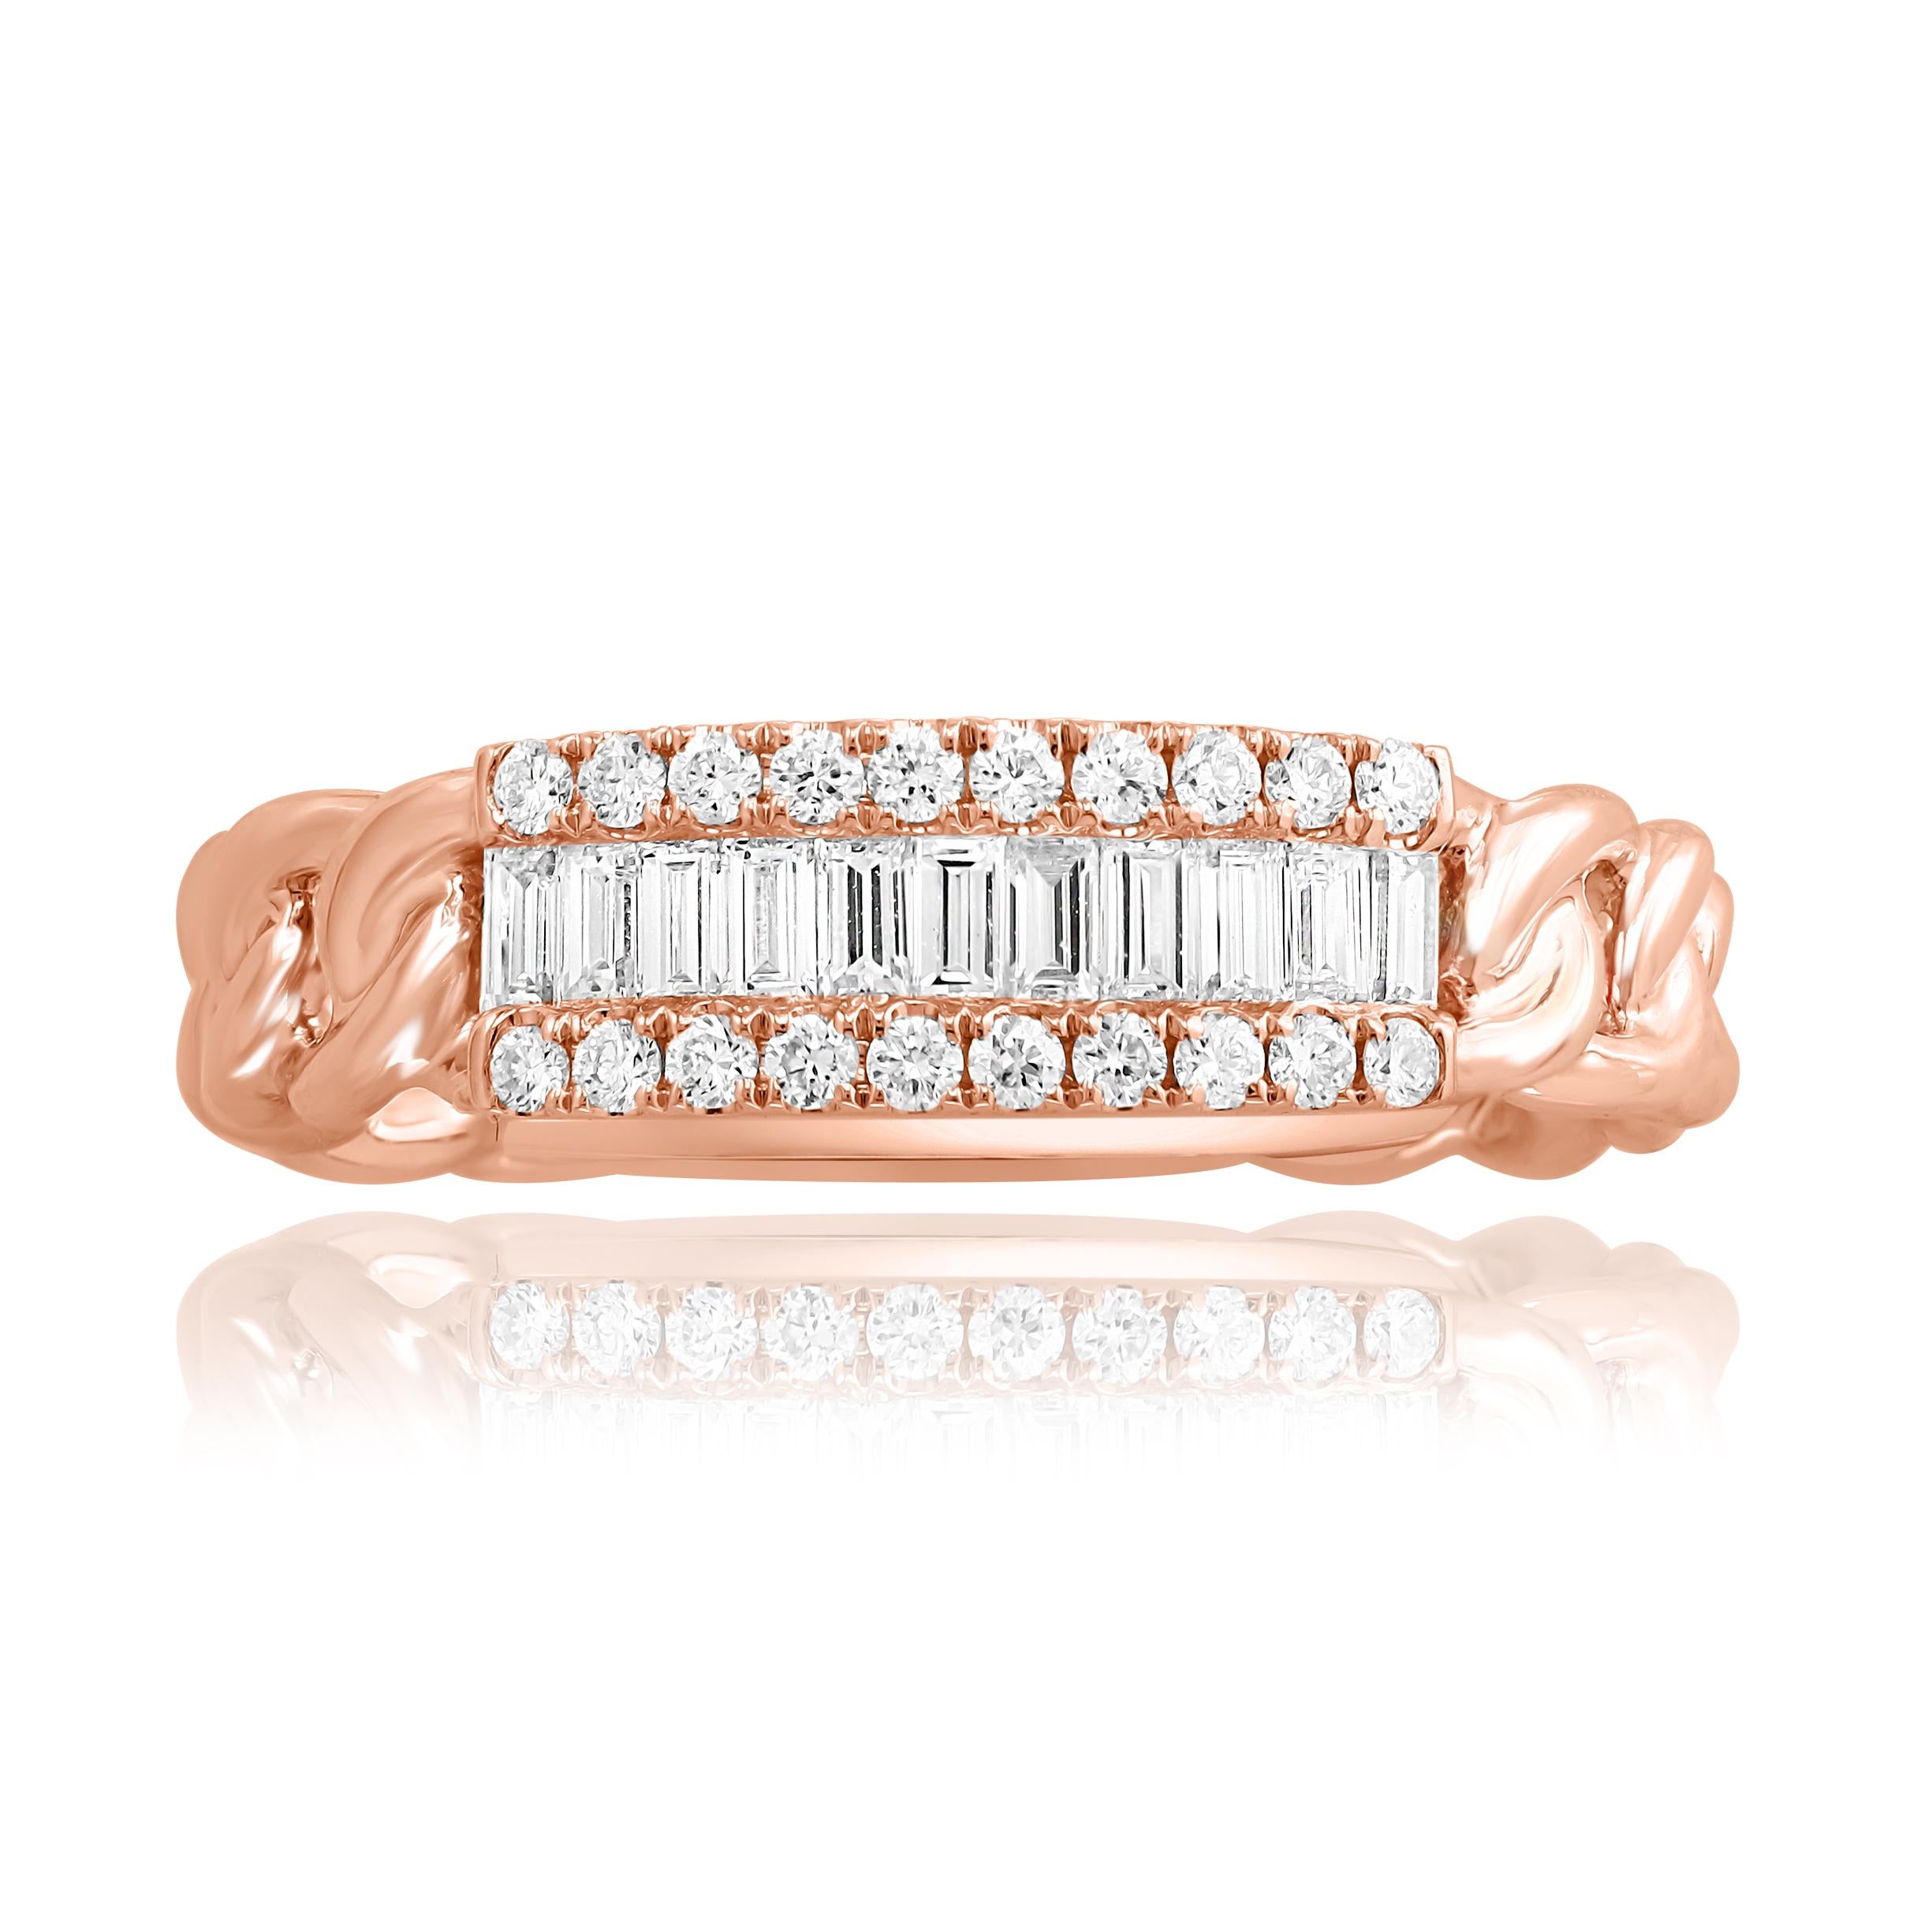 A fashionable piece of jewelry showcasing open work design. The middle style is encrusted with 11 baguette and 20 round brilliant diamonds weighing 0.25 carats and 0.16 carats total. Made in 18k rose gold.

Size 6.5 US (Sizable). One of a Kind 